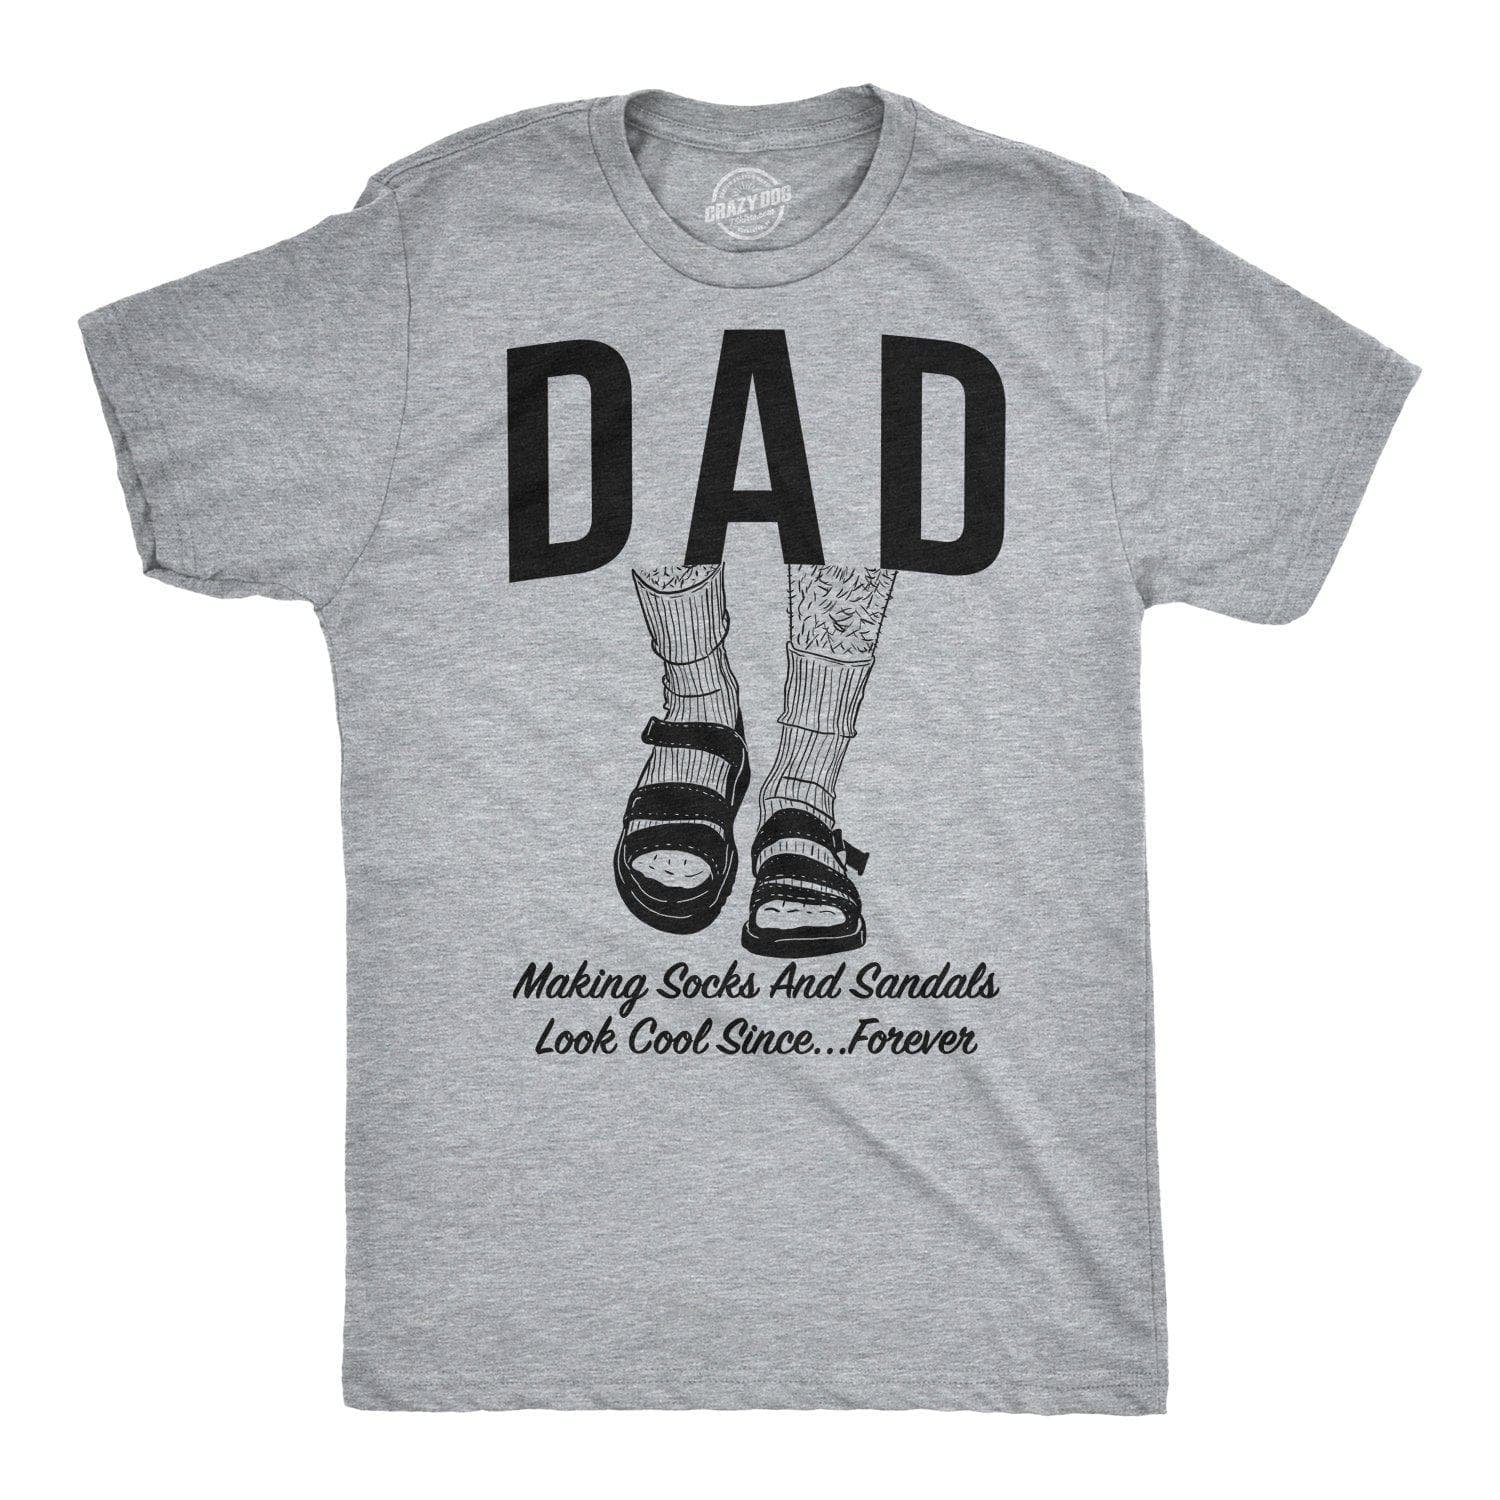 Image of Dad Socks and Sandals Men's Tshirt